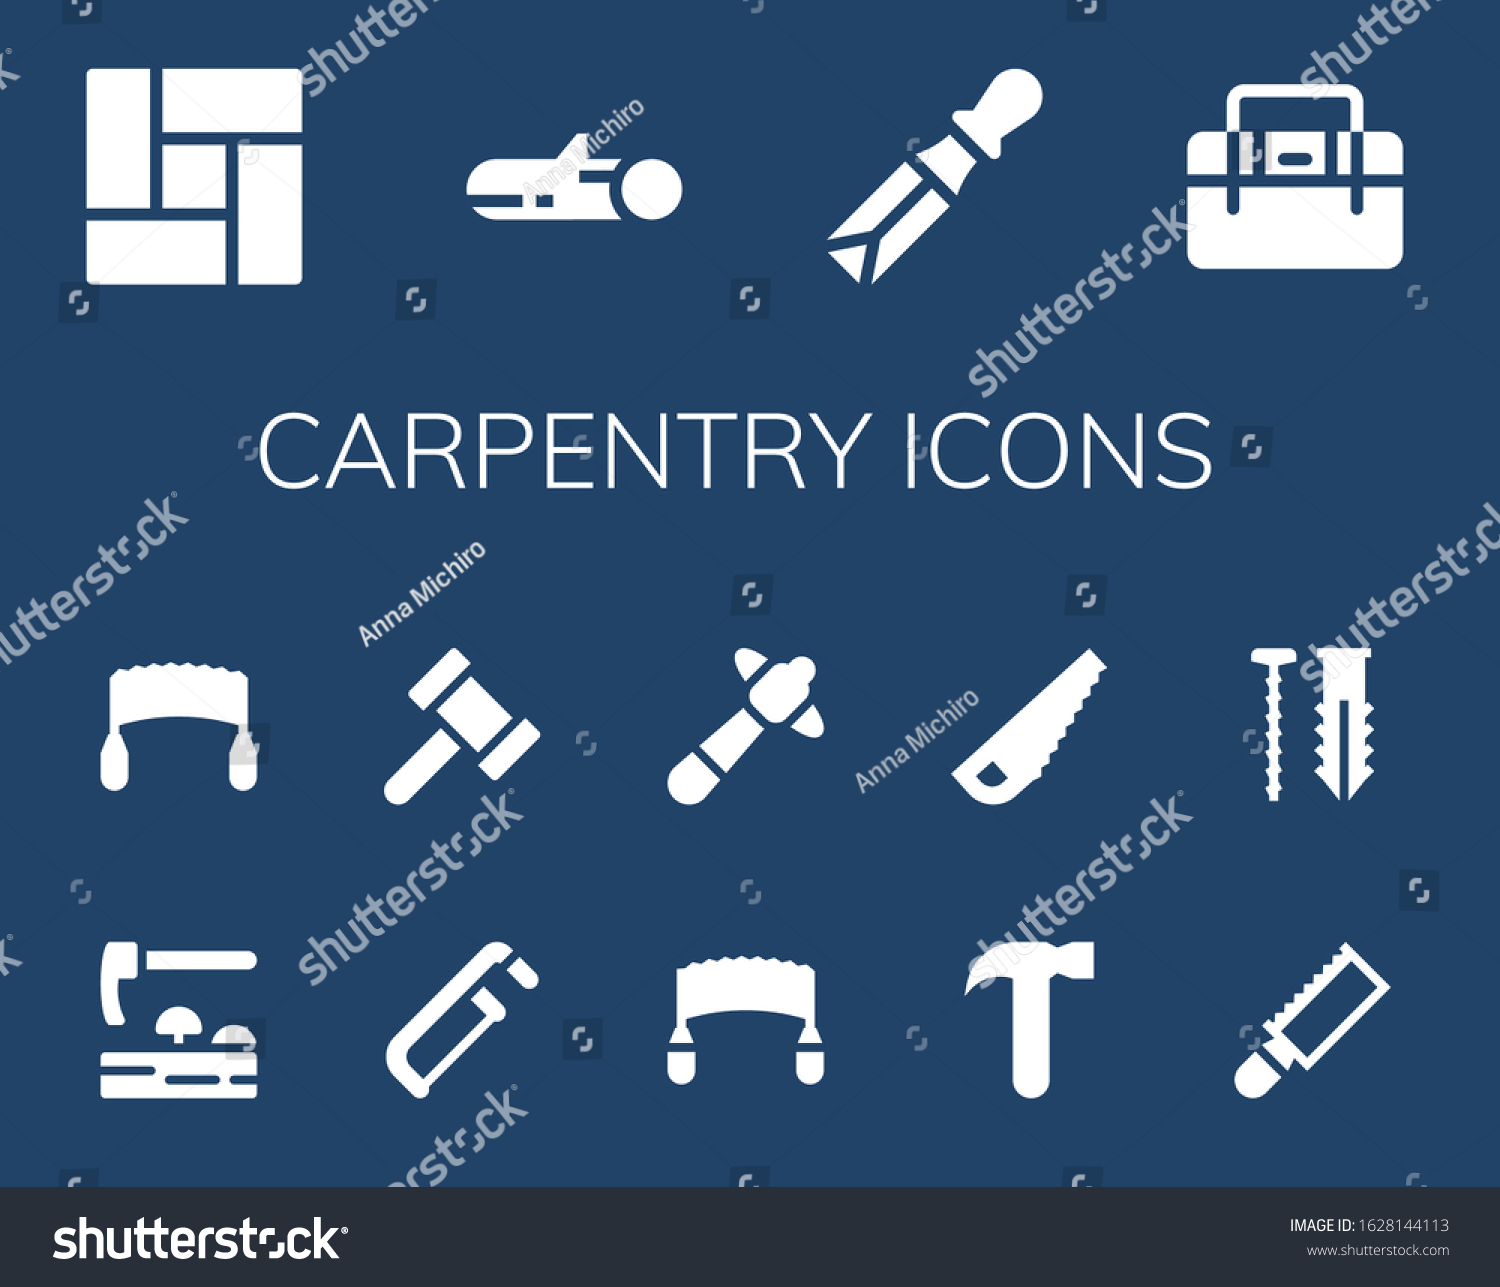 SVG of carpentry icon set. 14 filled carpentry icons. Included Floor, Wood, Chisel, Toolbox, Adze, Saw, Hammer, Screw icons svg